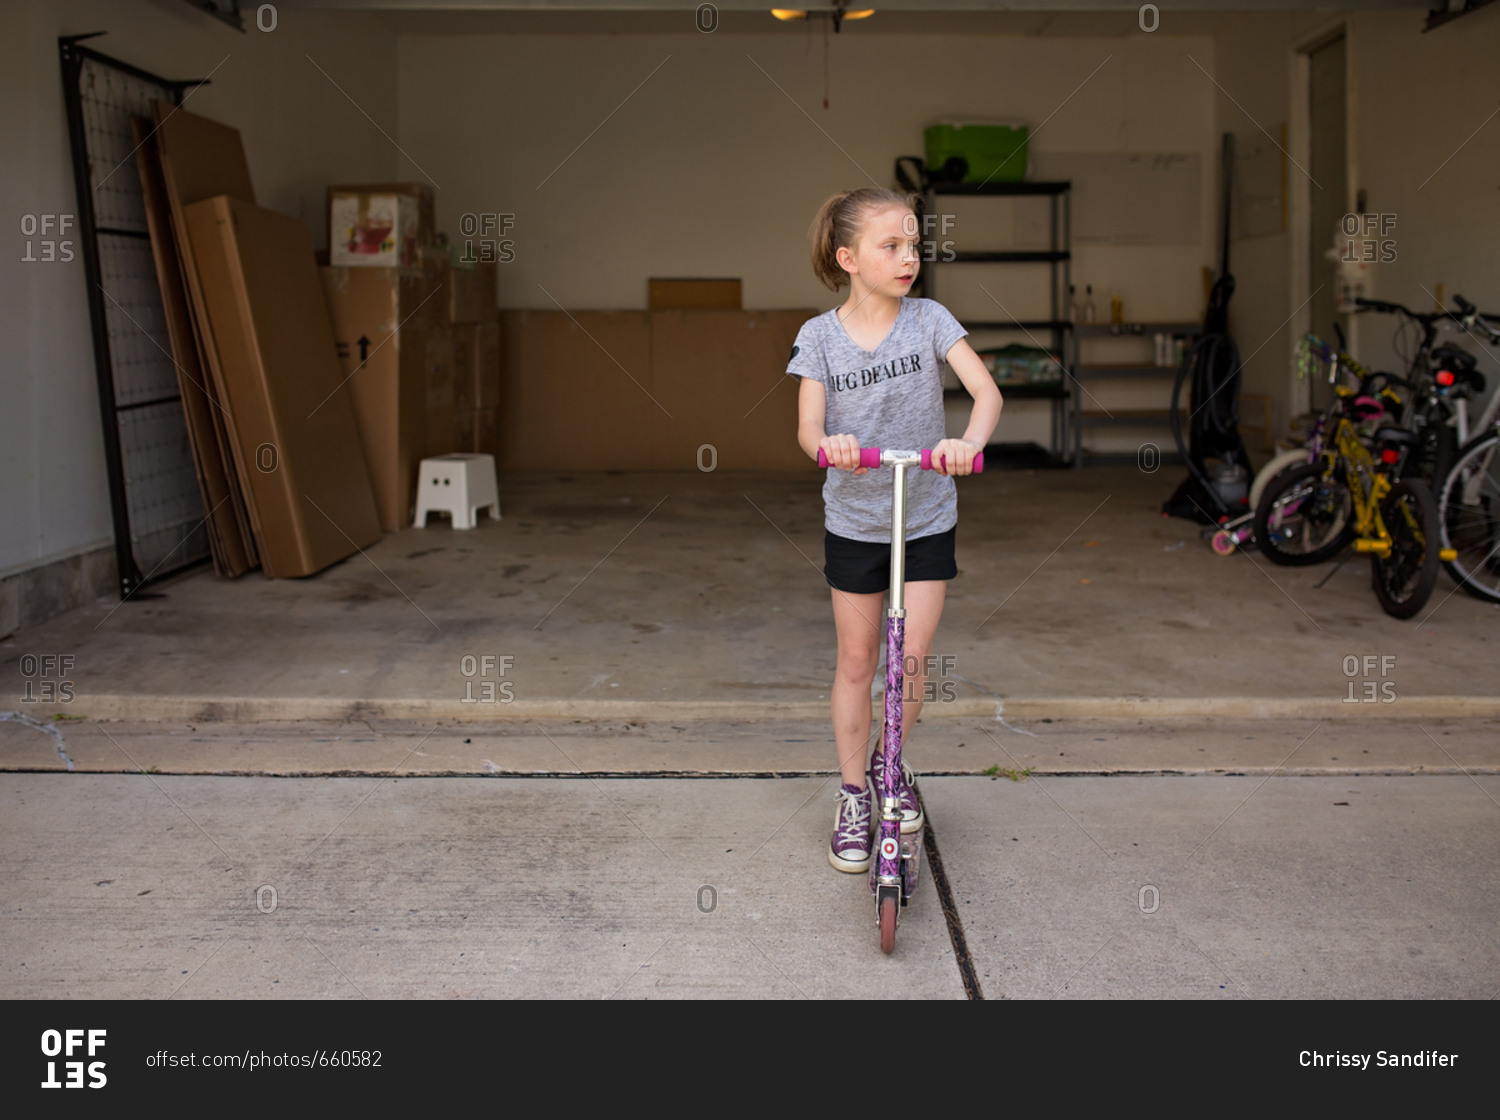 Girl riding scooter in front of moving boxes in a garage